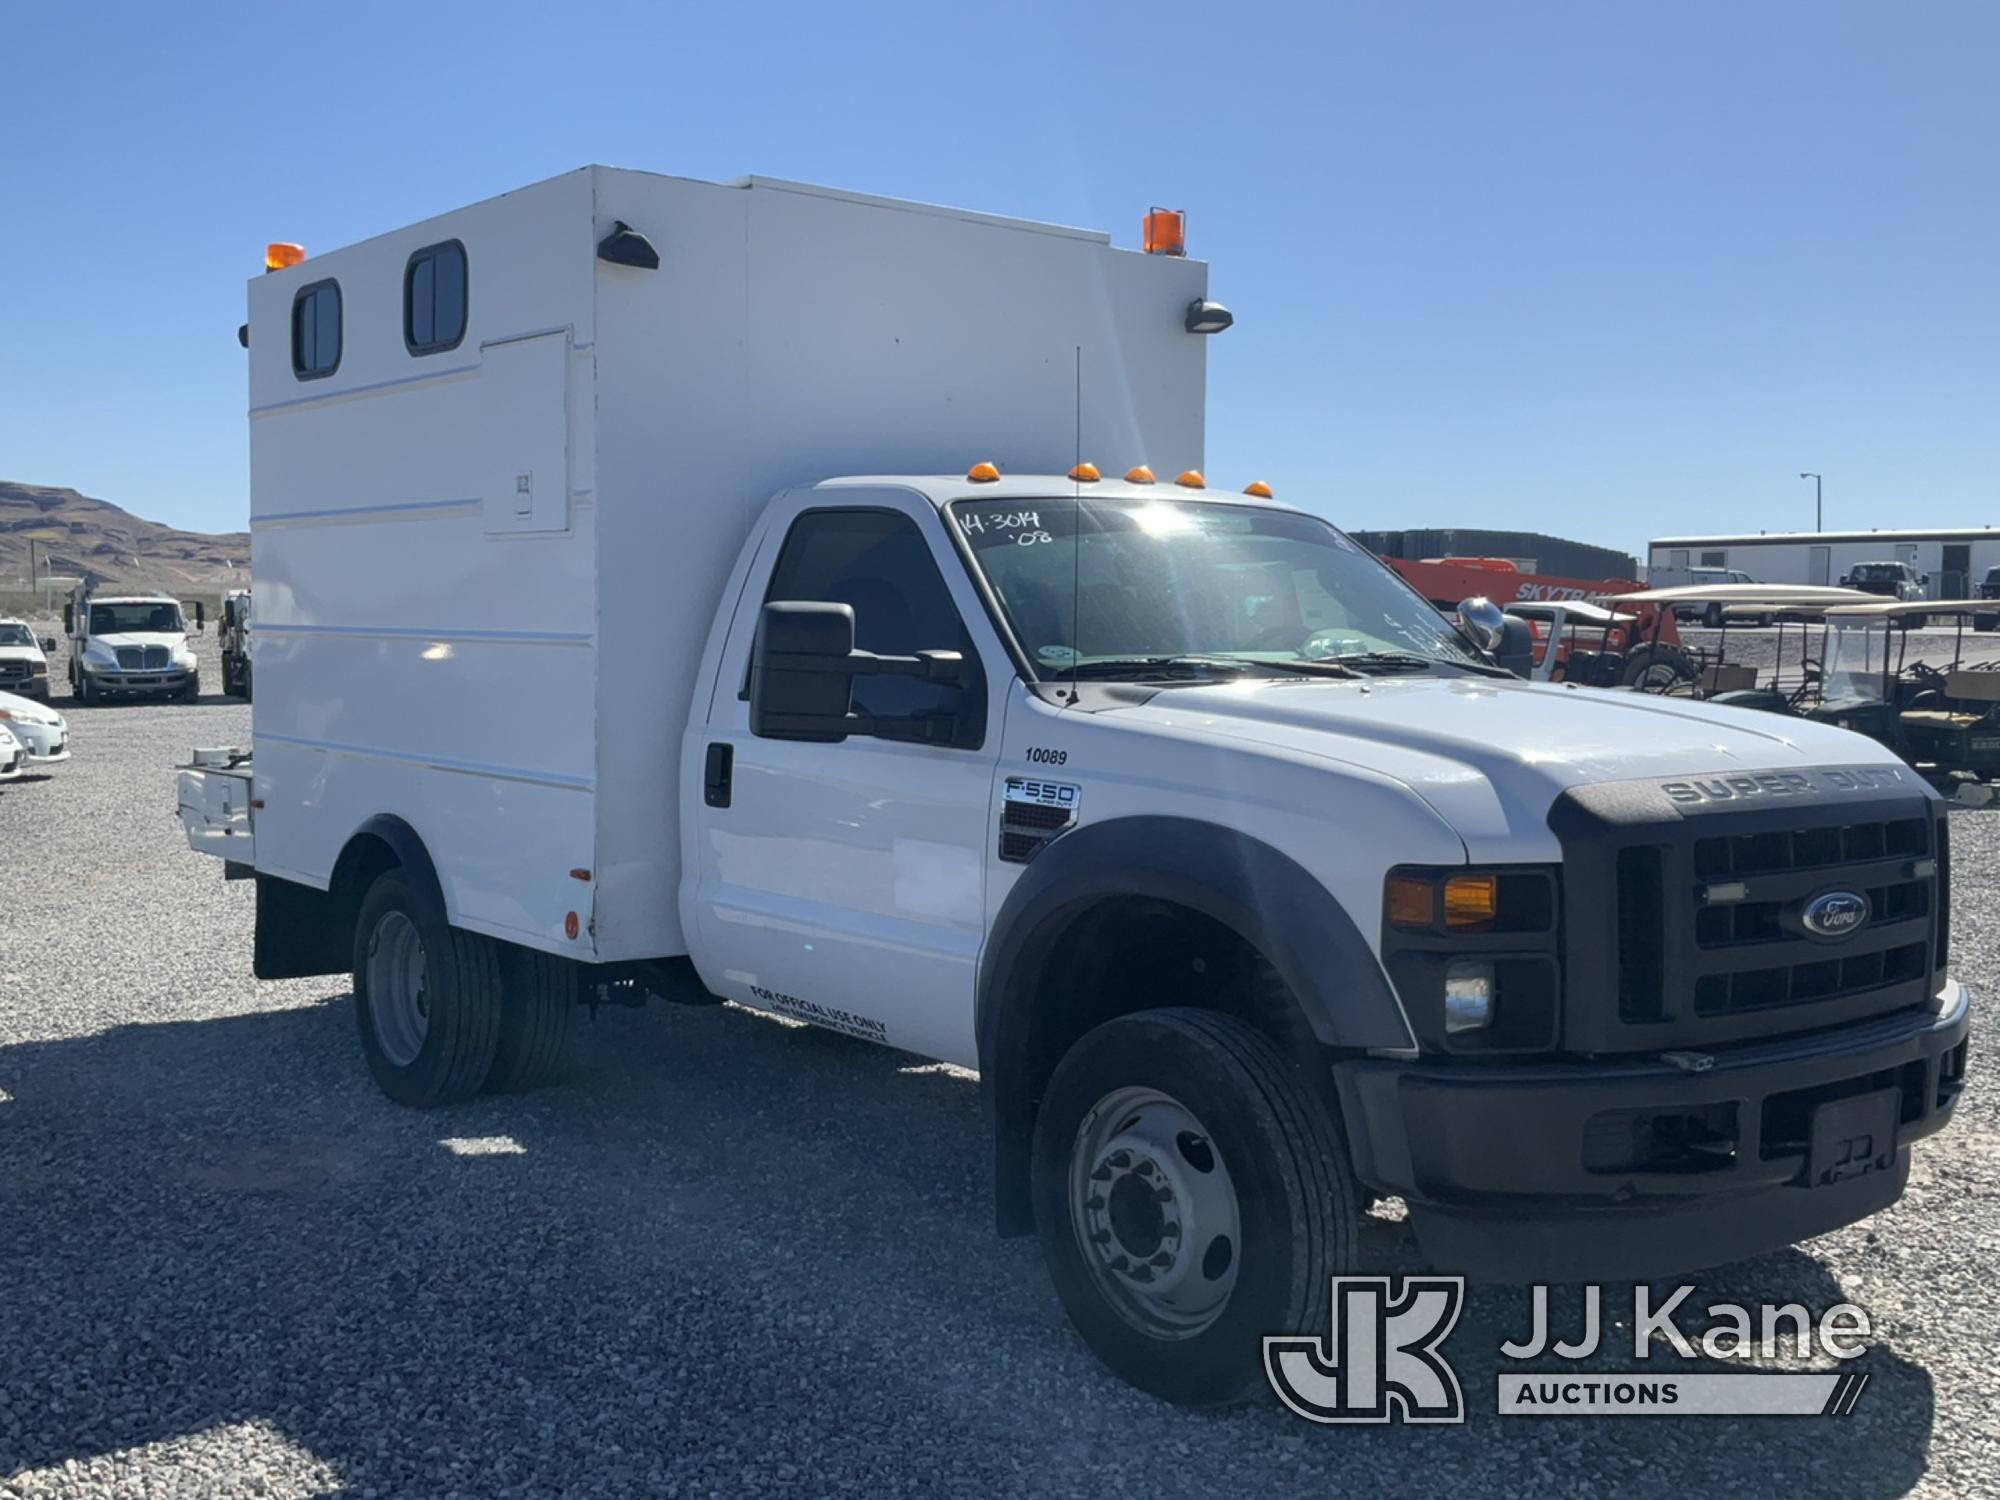 (Las Vegas, NV) 2008 Ford F550 Service Truck, Towed In, ABS Light On Check Engine Light On, Reduced